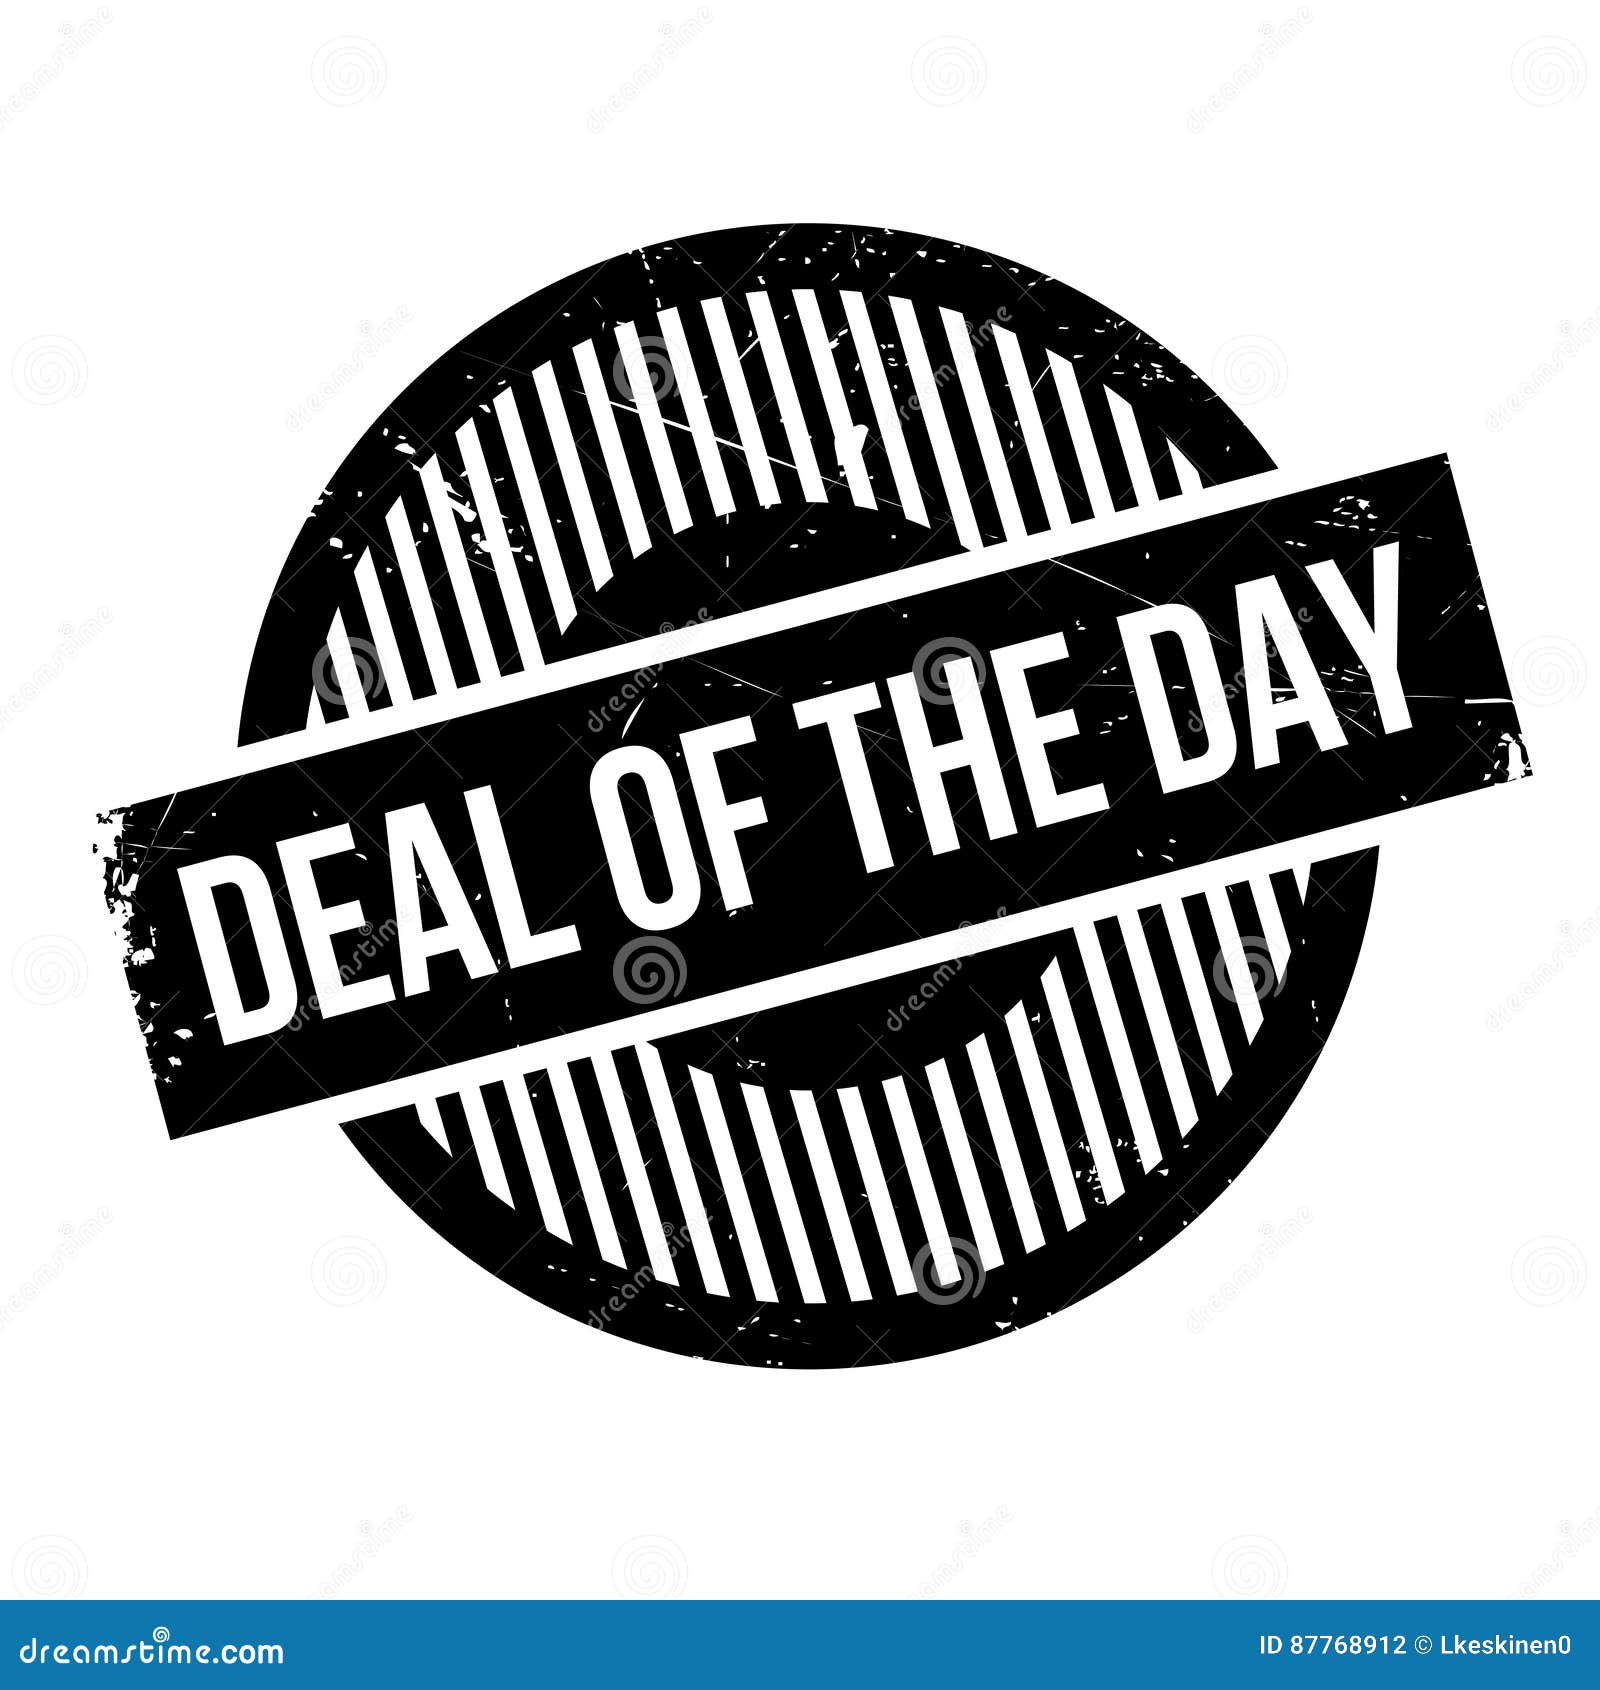 https://thumbs.dreamstime.com/z/deal-day-rubber-stamp-grunge-design-dust-scratches-effects-can-be-easily-removed-clean-crisp-look-color-87768912.jpg